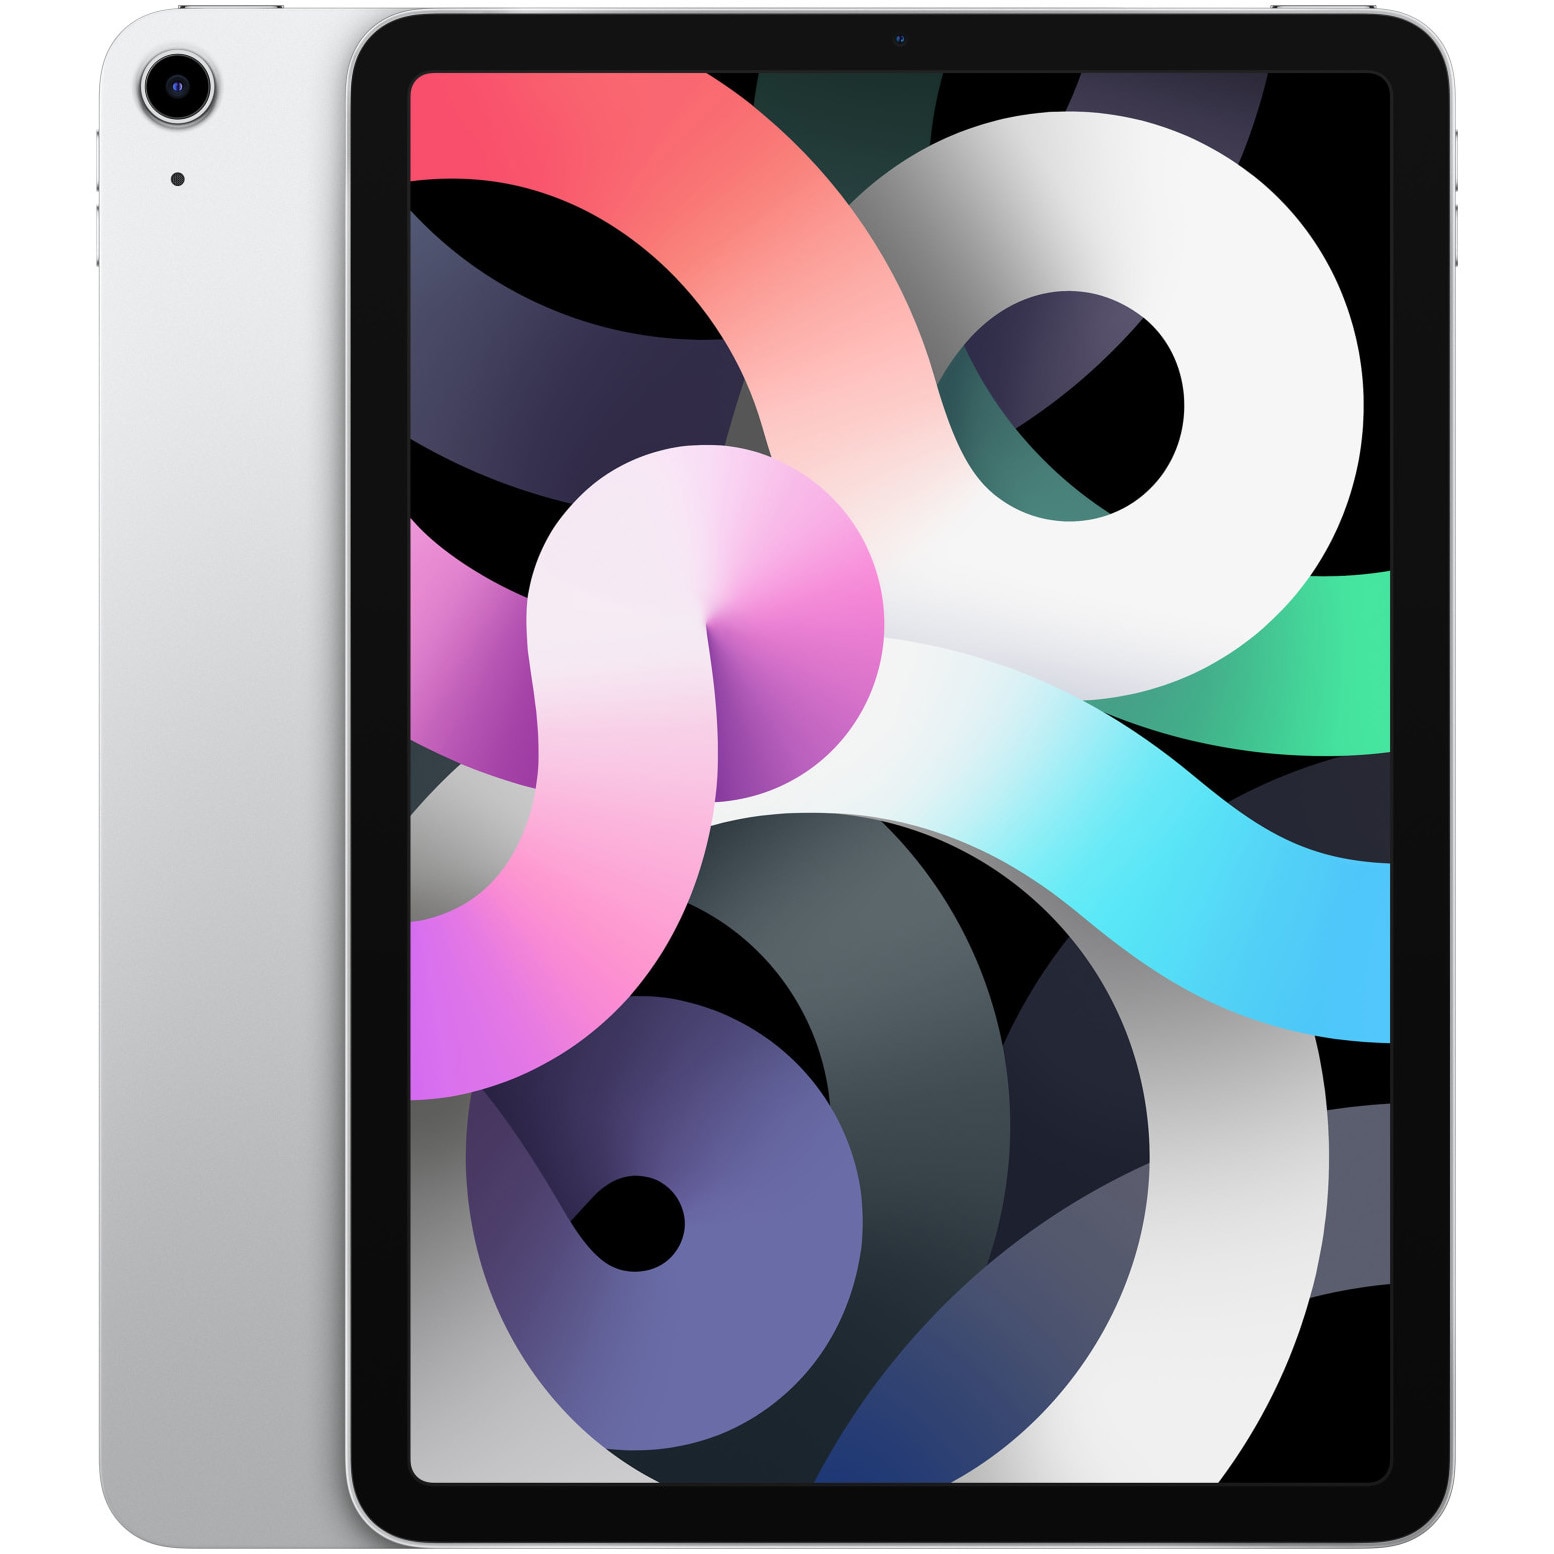 laundry Filth Extremists Apple iPad Air 4 (2020), 10.9", 64GB, Wi-Fi, Silver - eMAG.ro